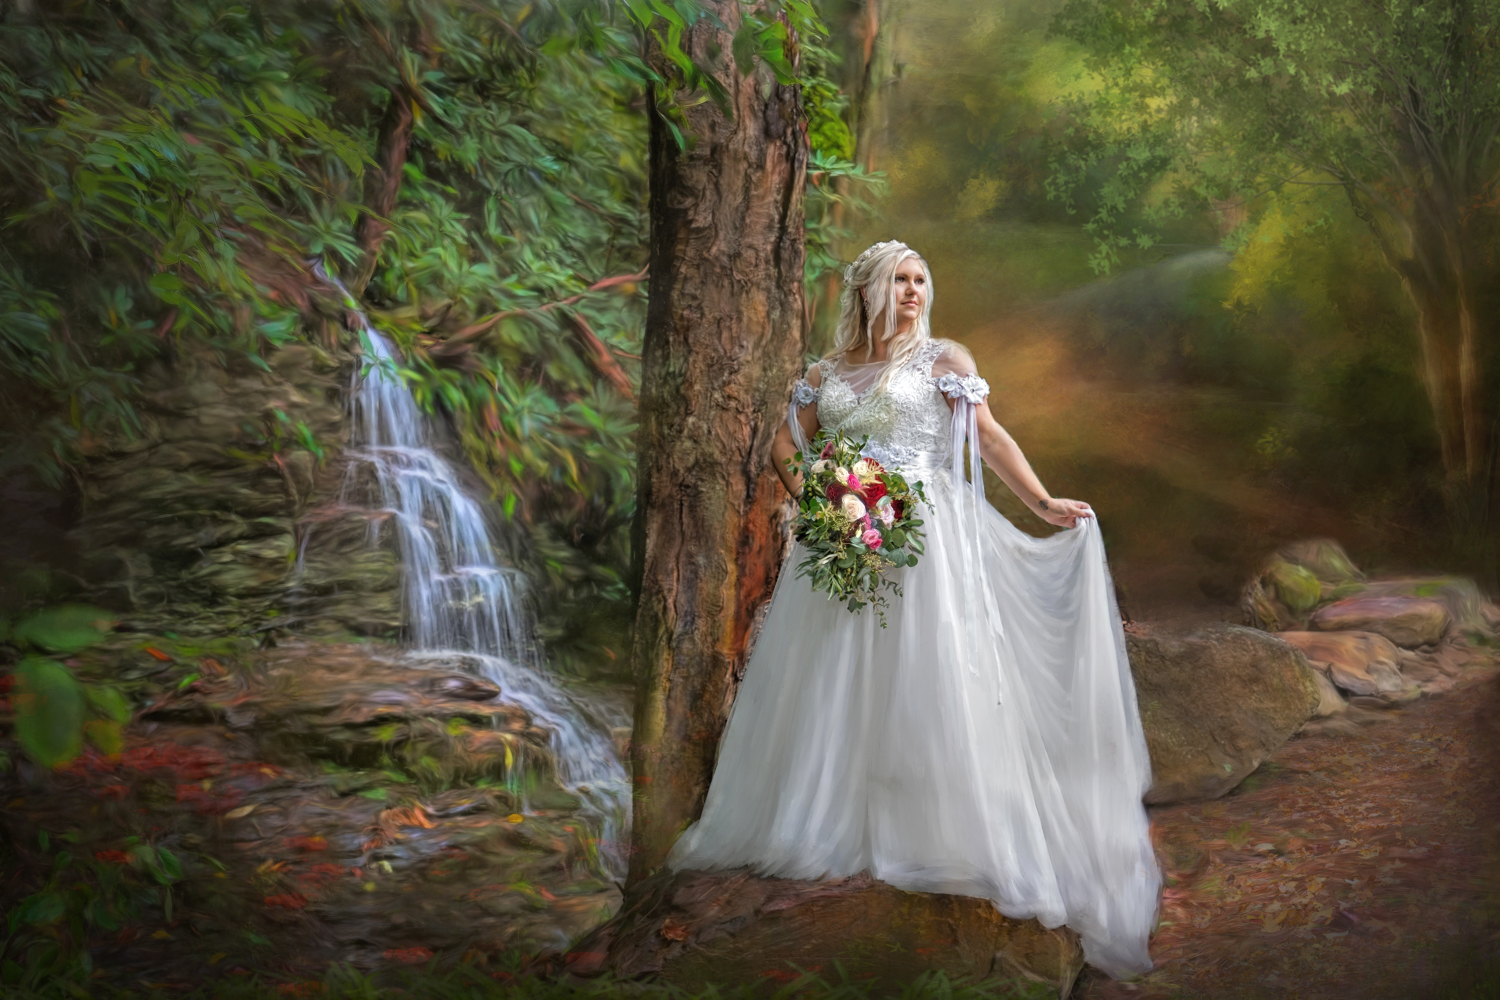 Painting of a bride standing on a rock by a Smoky Mountain Waterfall